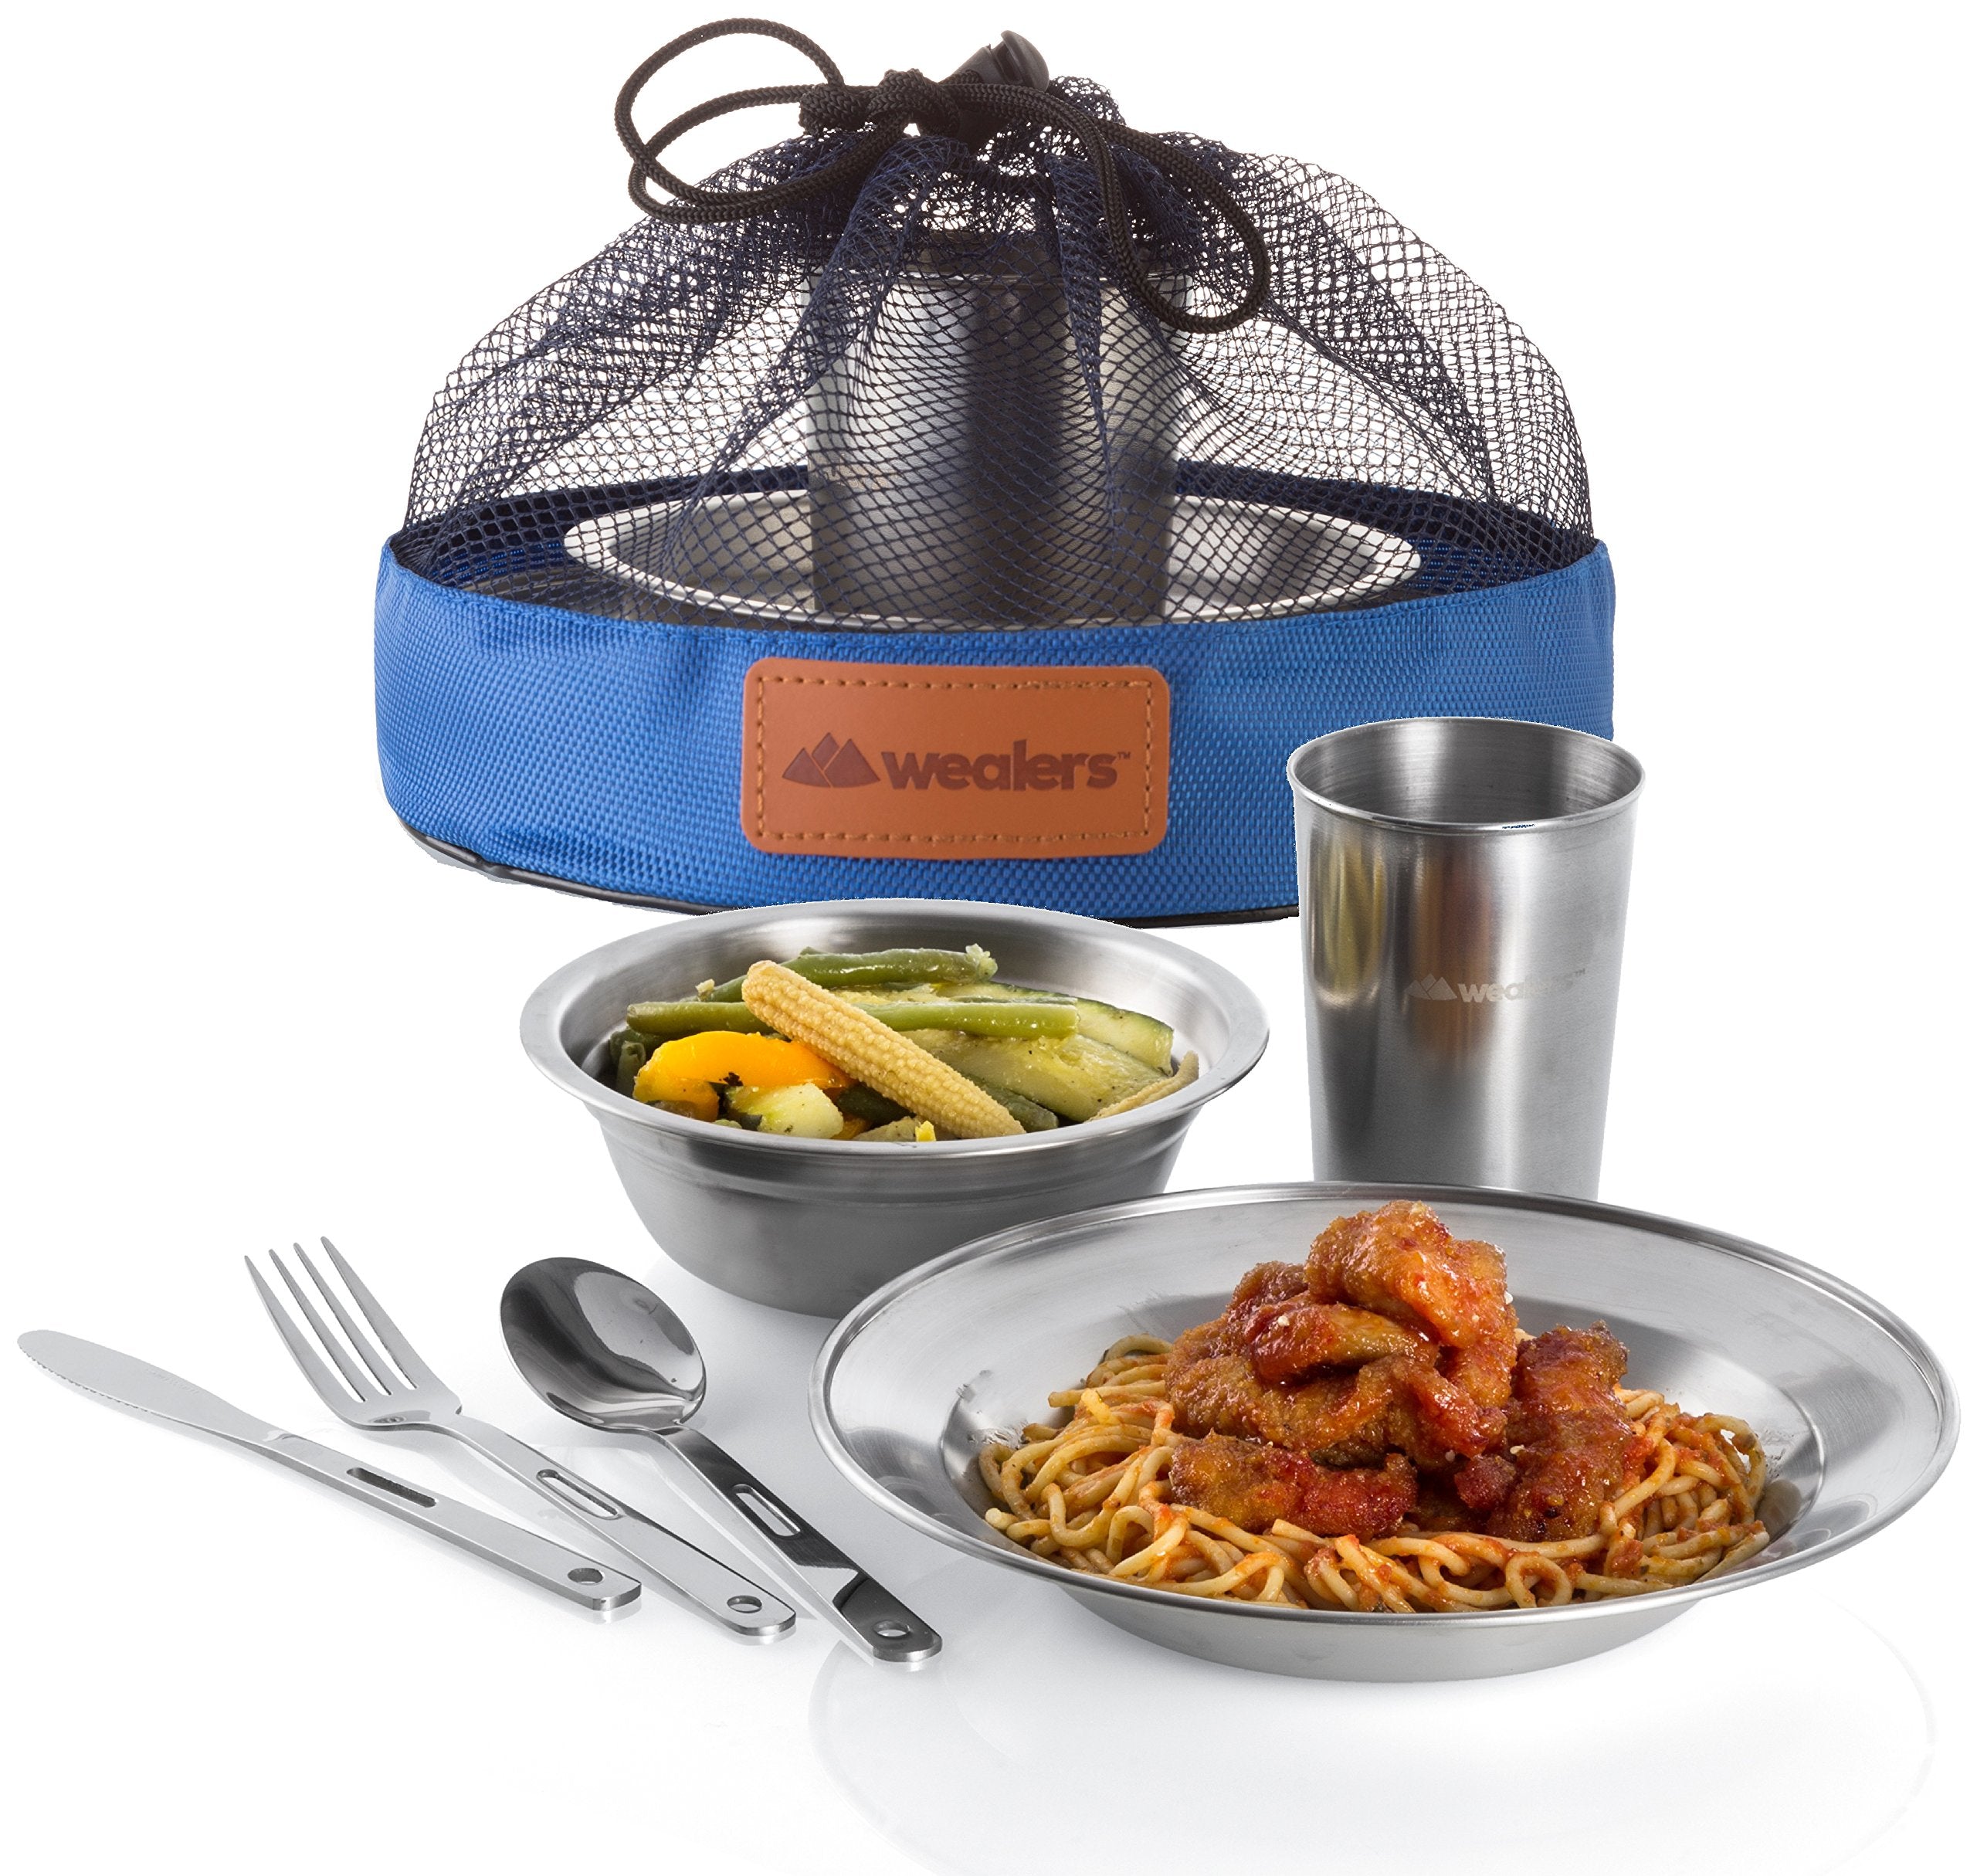 Unique Complete Messware Kit Polished Stainless Steel Dishes Set| Tableware| Dinnerware| Camping| Includes - Cups | Plates| Bowls| Cutlery| Comes in Mesh Bags  - Like New